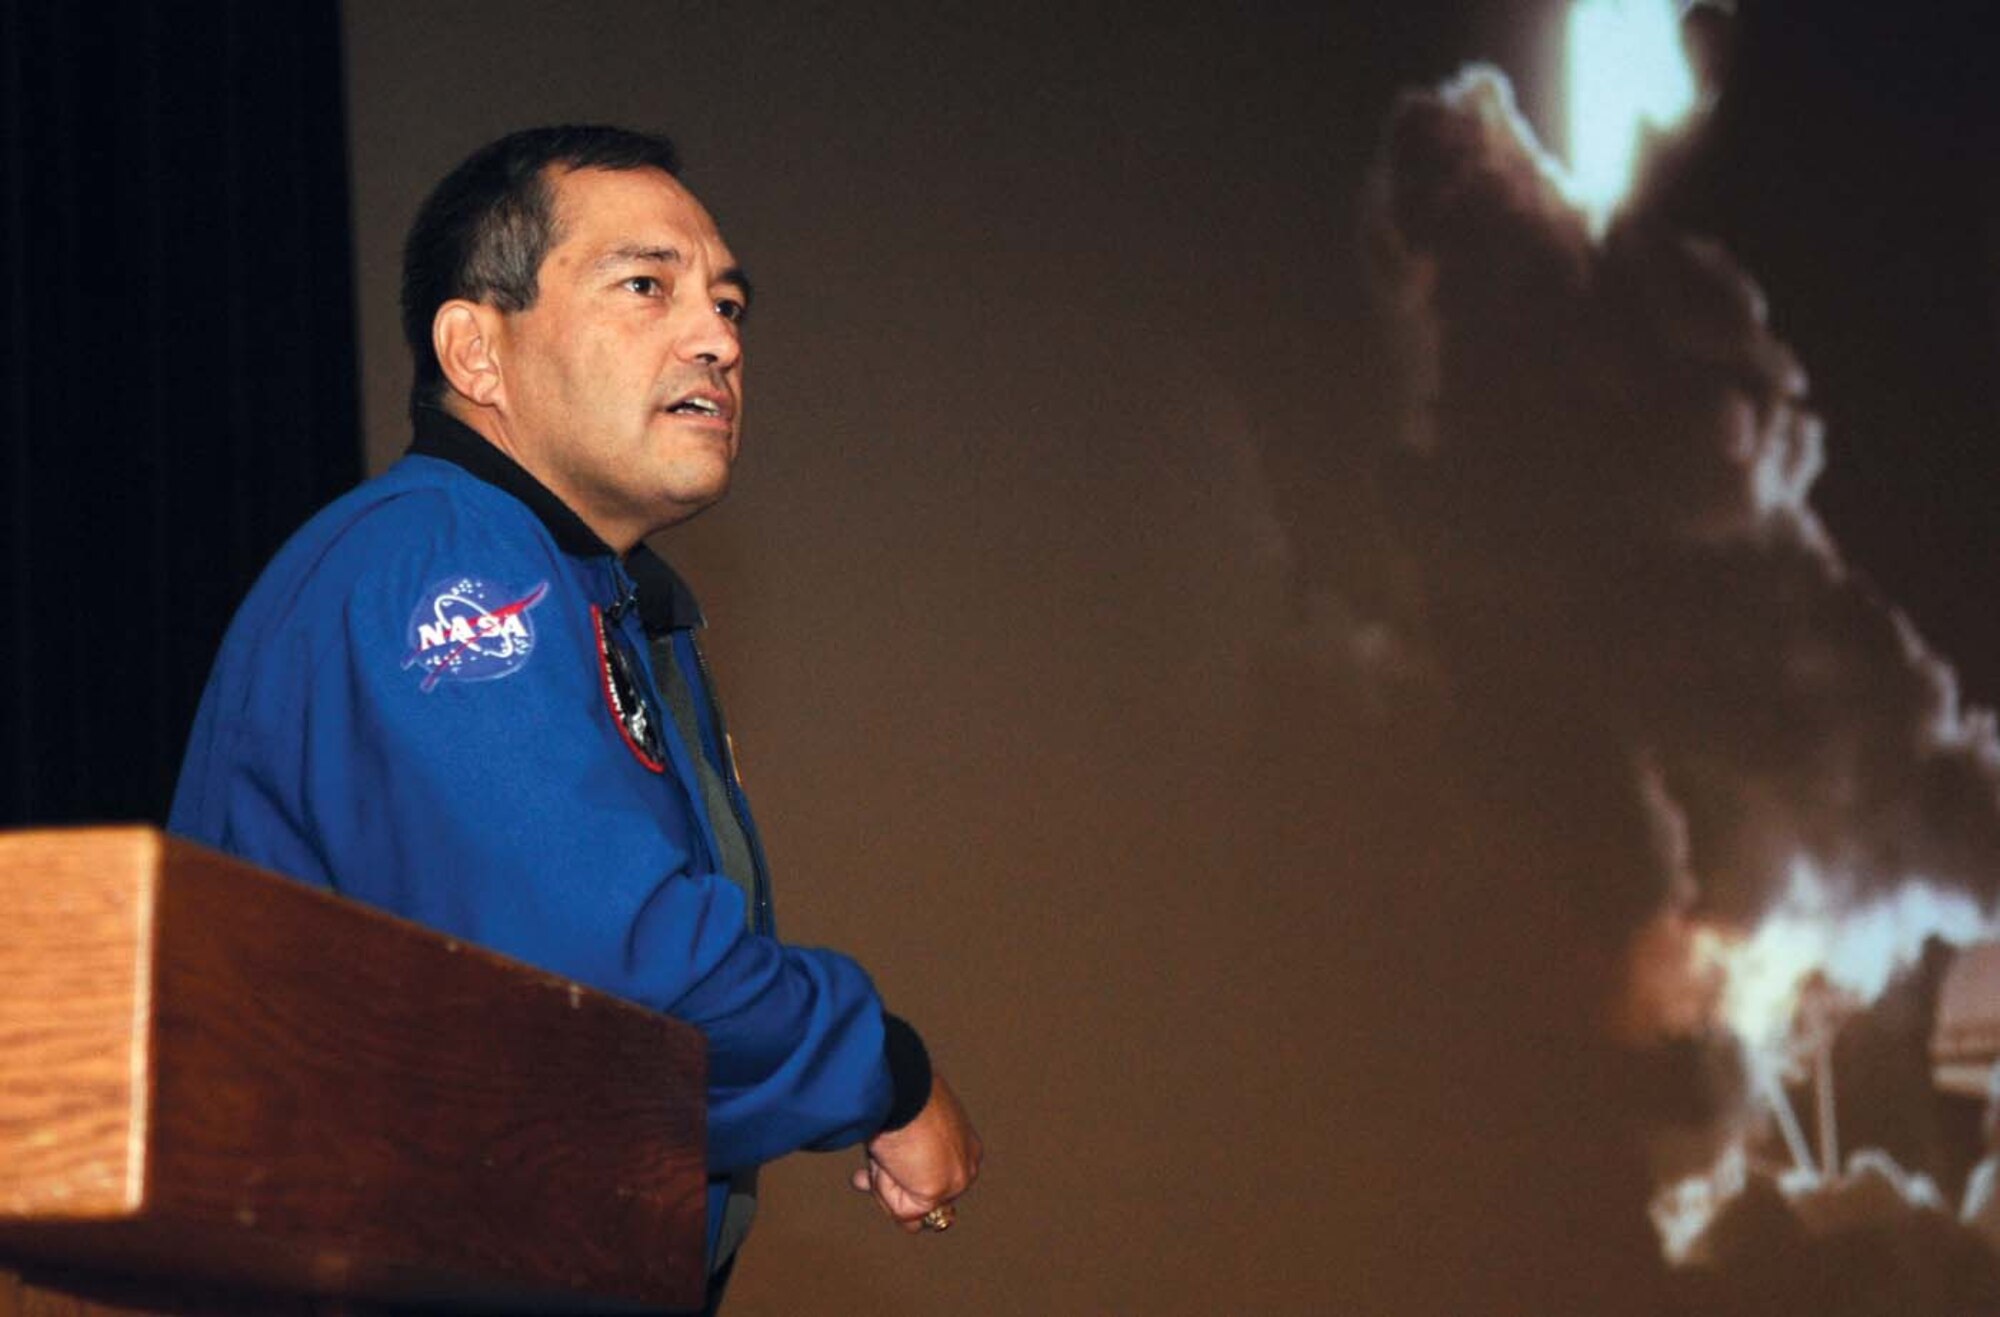 Astronaut Lt. Col. (ret.) Carlos Noriega speaks to Team Andrews members at the base theater Wednesday, as part of the base’s Hispanic Heritage Month activities. Mr. Noriega is a retired U.S. Marine Corps helicopter pilot and veteran of two space shuttle missions with more than 481 hours in space and 19 hours conducting spacewalks. (U.S. Air Force photo/ Senior Airman Steven Doty)